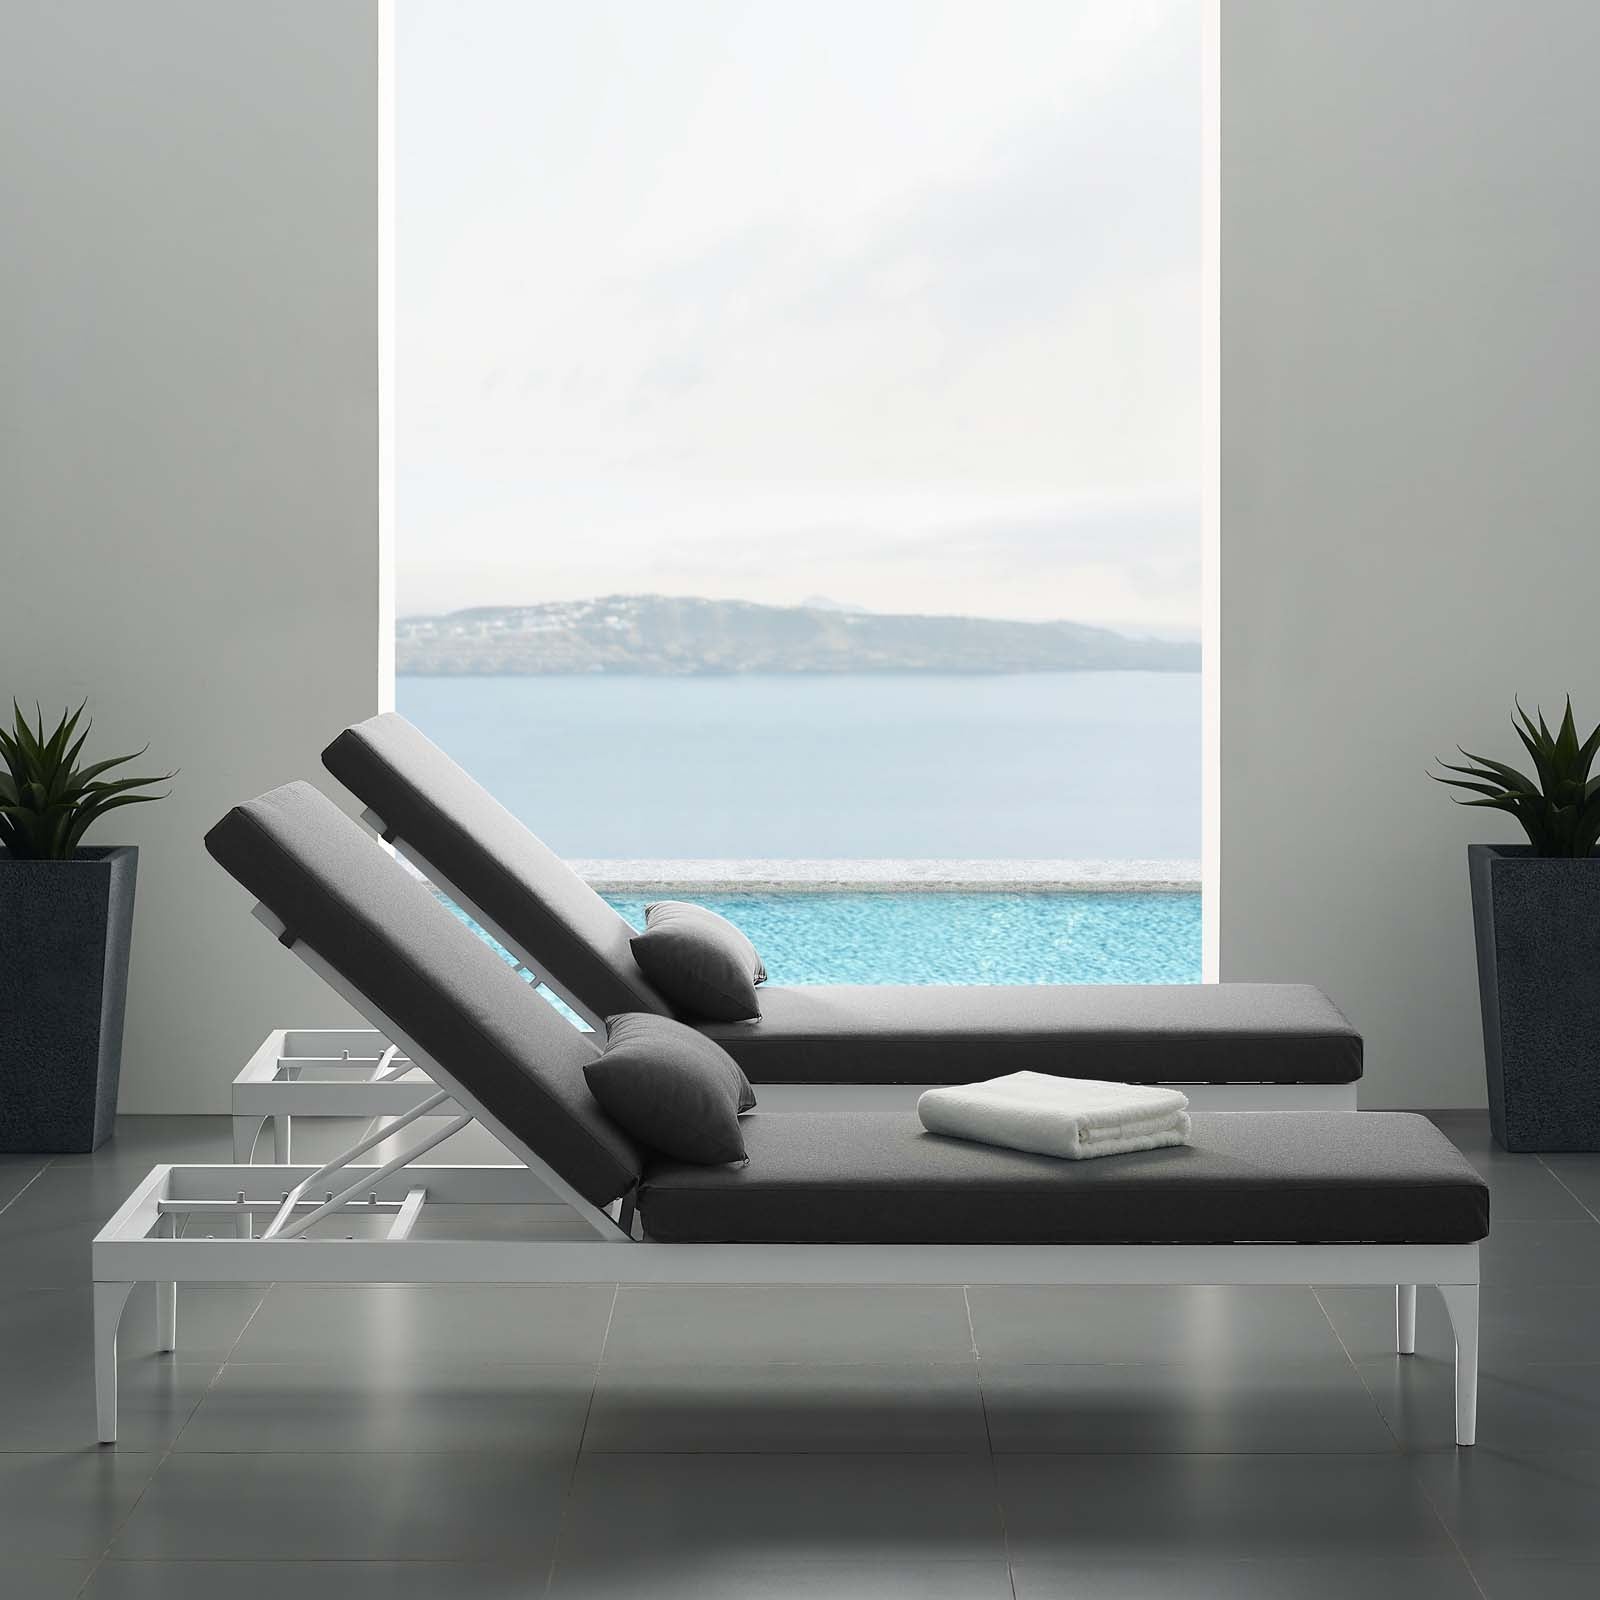 Perspective Cushion Outdoor Patio Chaise Lounge Chair - East Shore Modern Home Furnishings